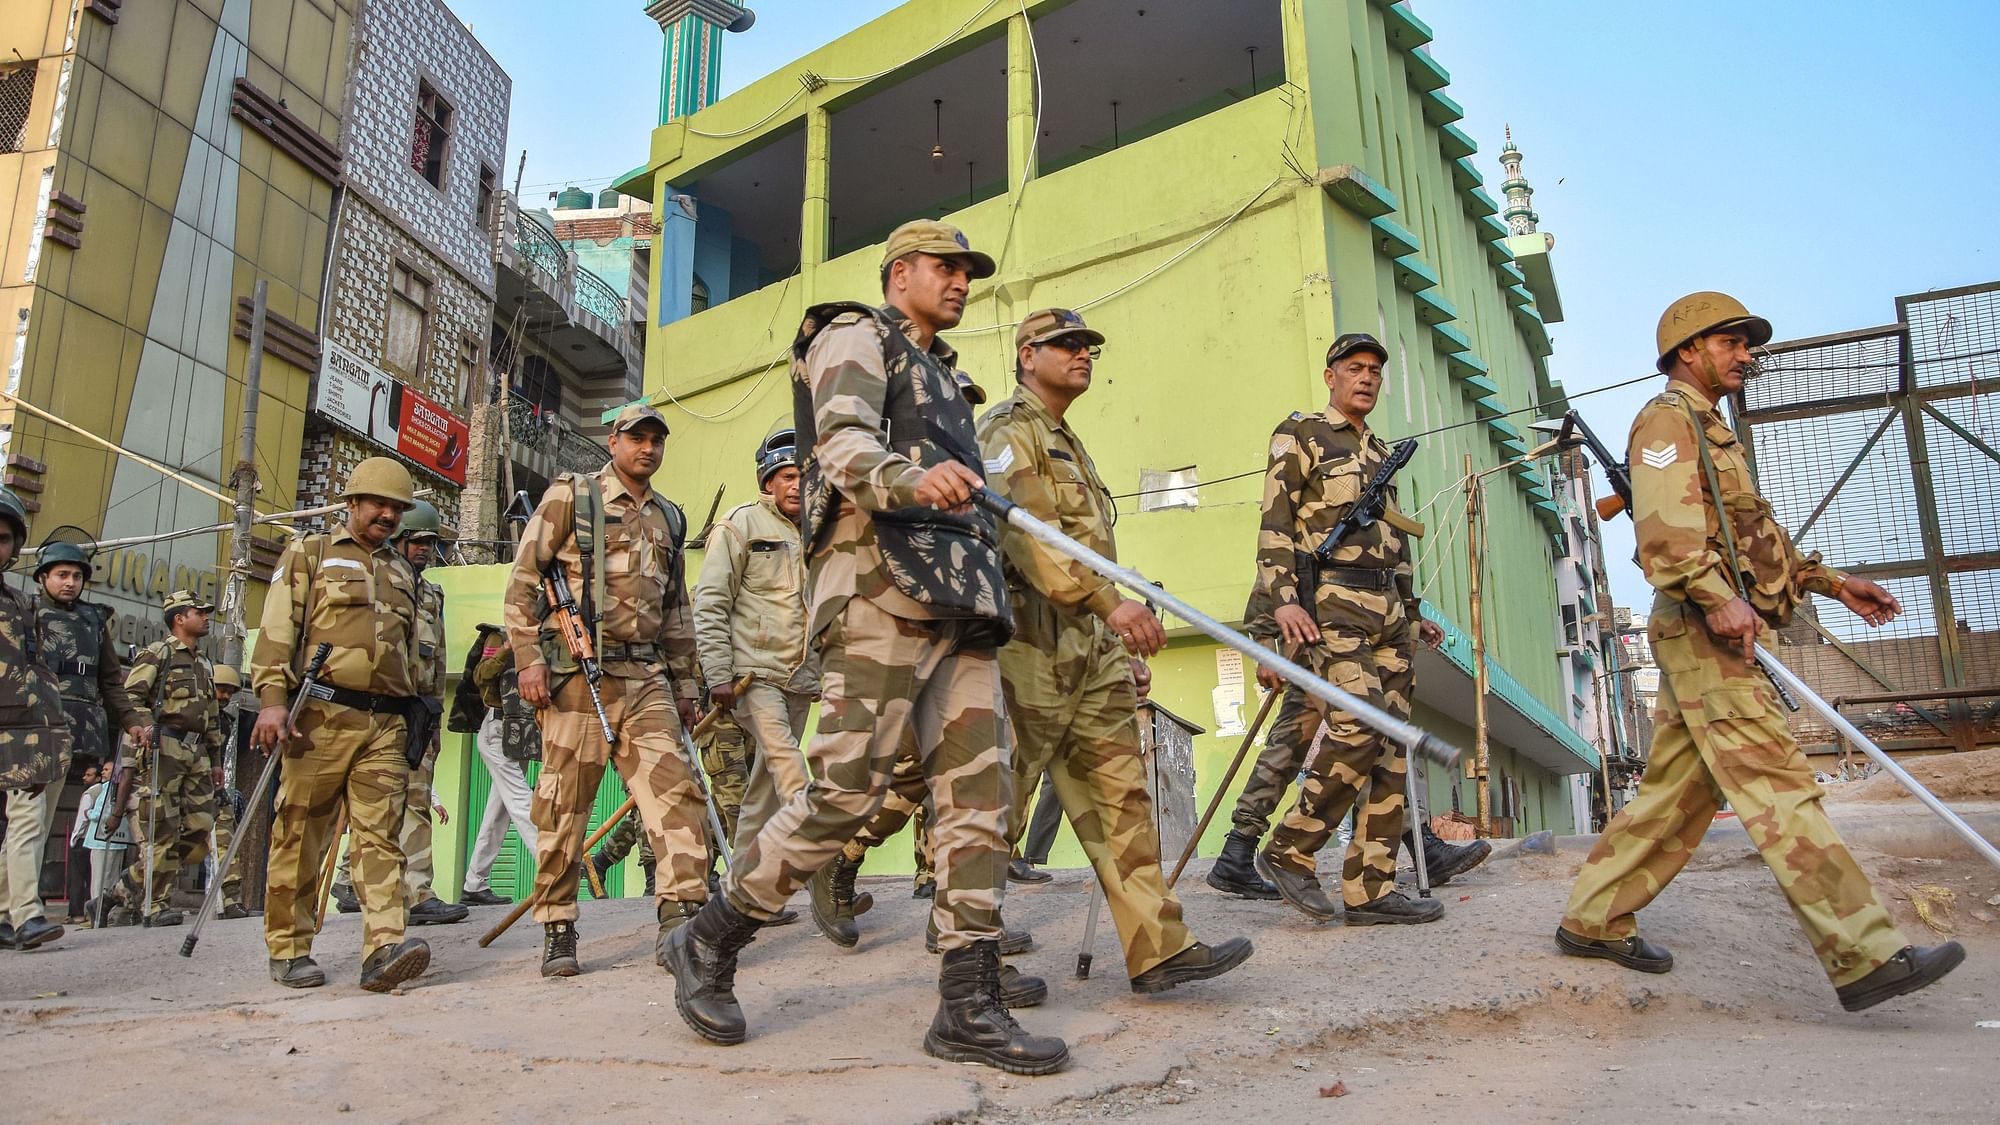 Security personnel patrol at Chand Bagh, one of the riot affected areas, in northeast Delhi. Image used for representational purposes.